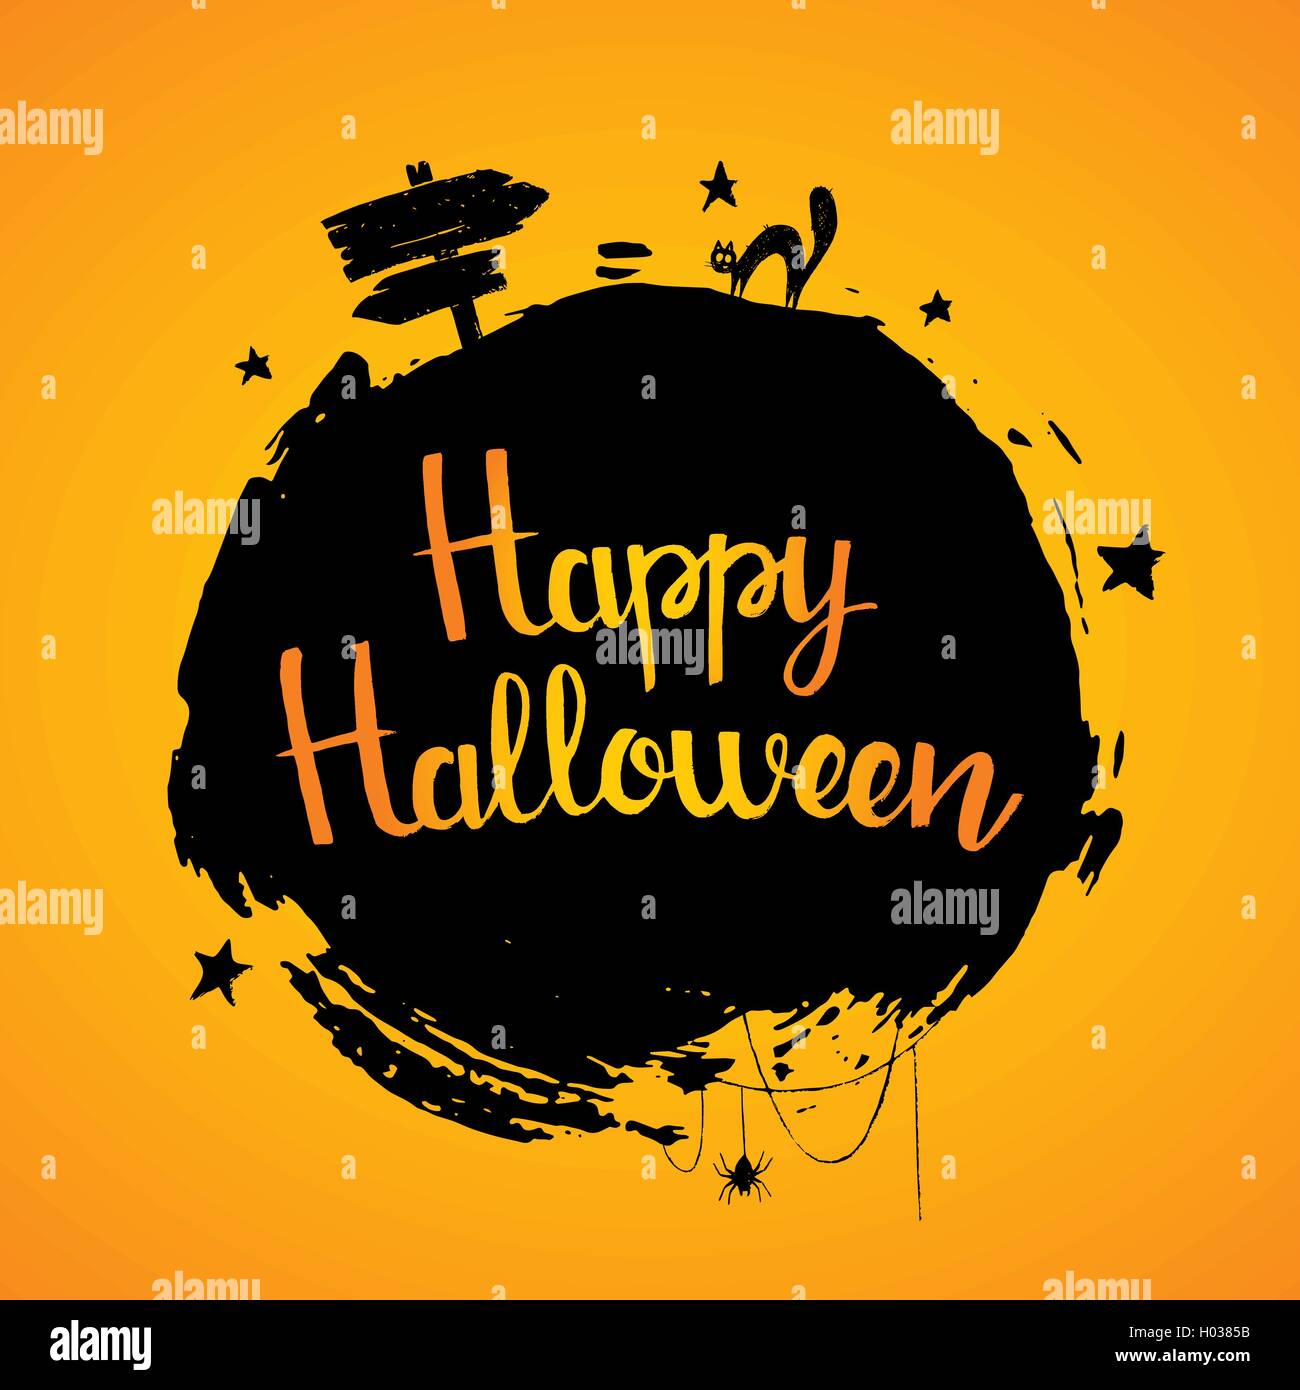 Happy Halloween lettering. Hand drawn calligraphy with brush texture, black cat, spider web, stars and direction sign Stock Vector